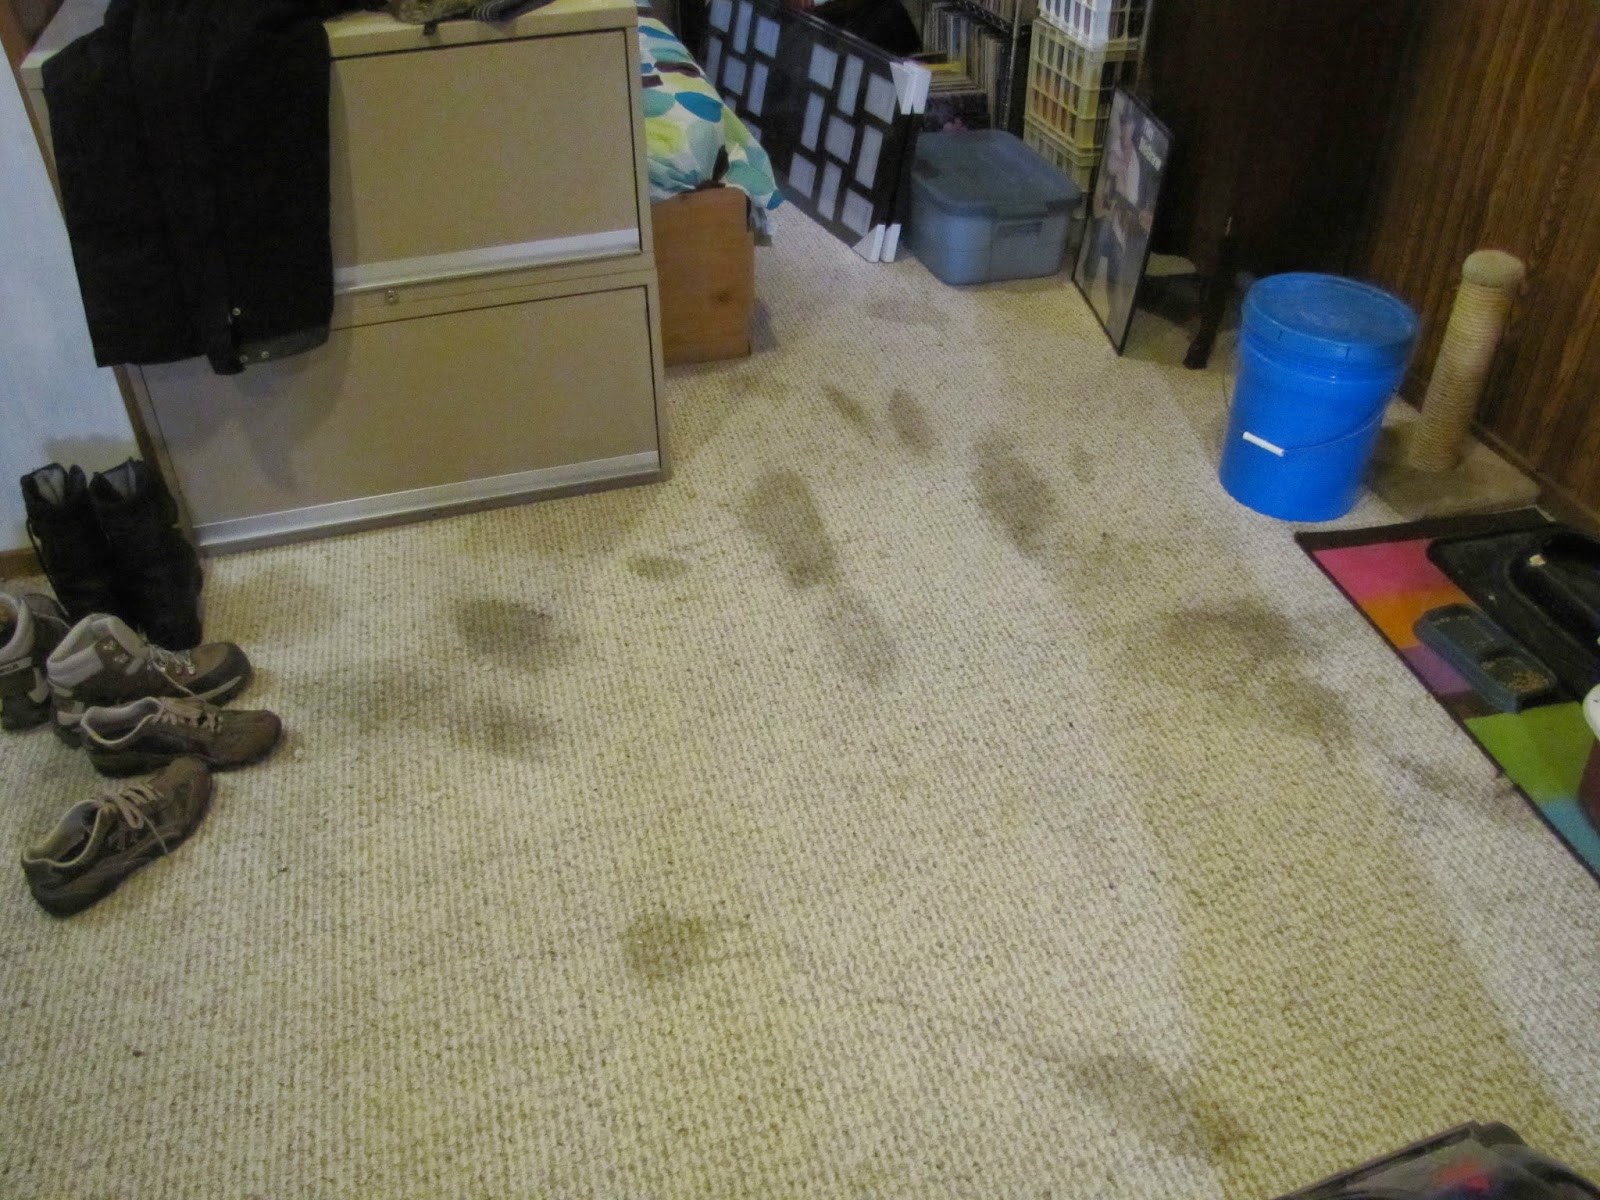 How to remove pet stains from carpet